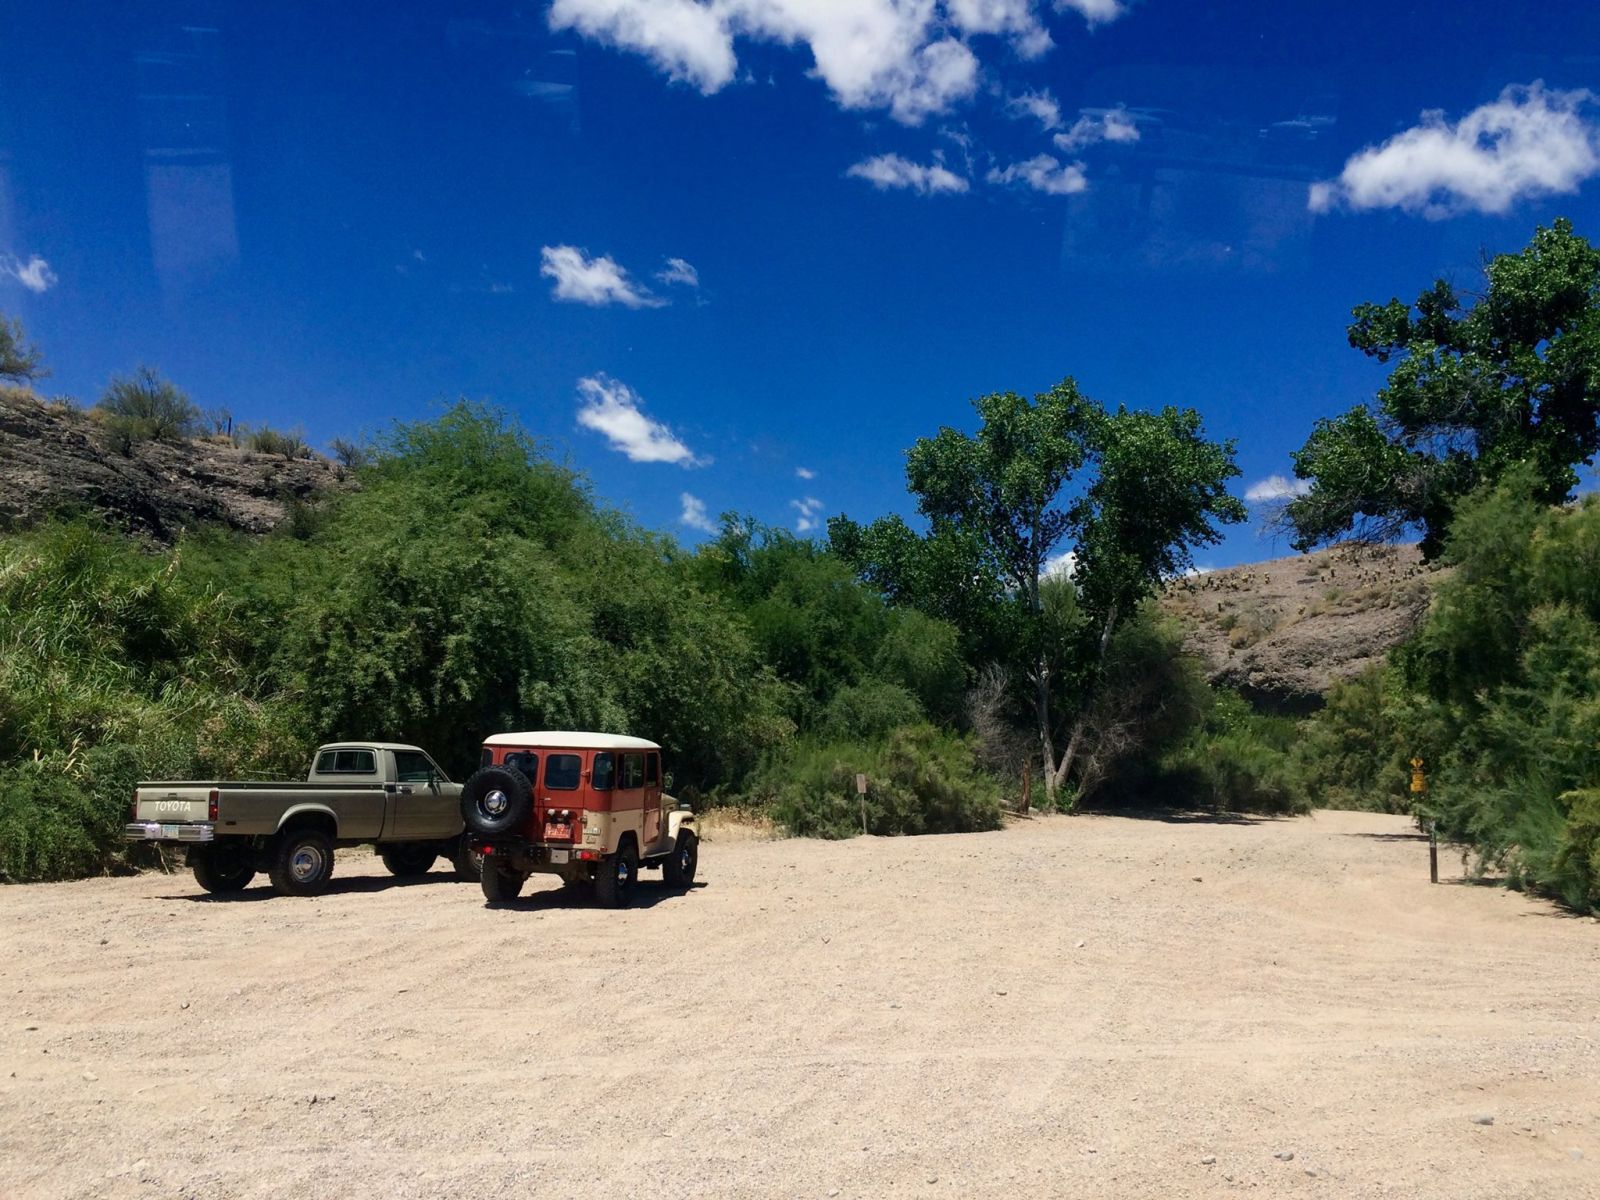  Photo by Garrett Topham. “Tonto and Hector the pickup truck getting ready to go”